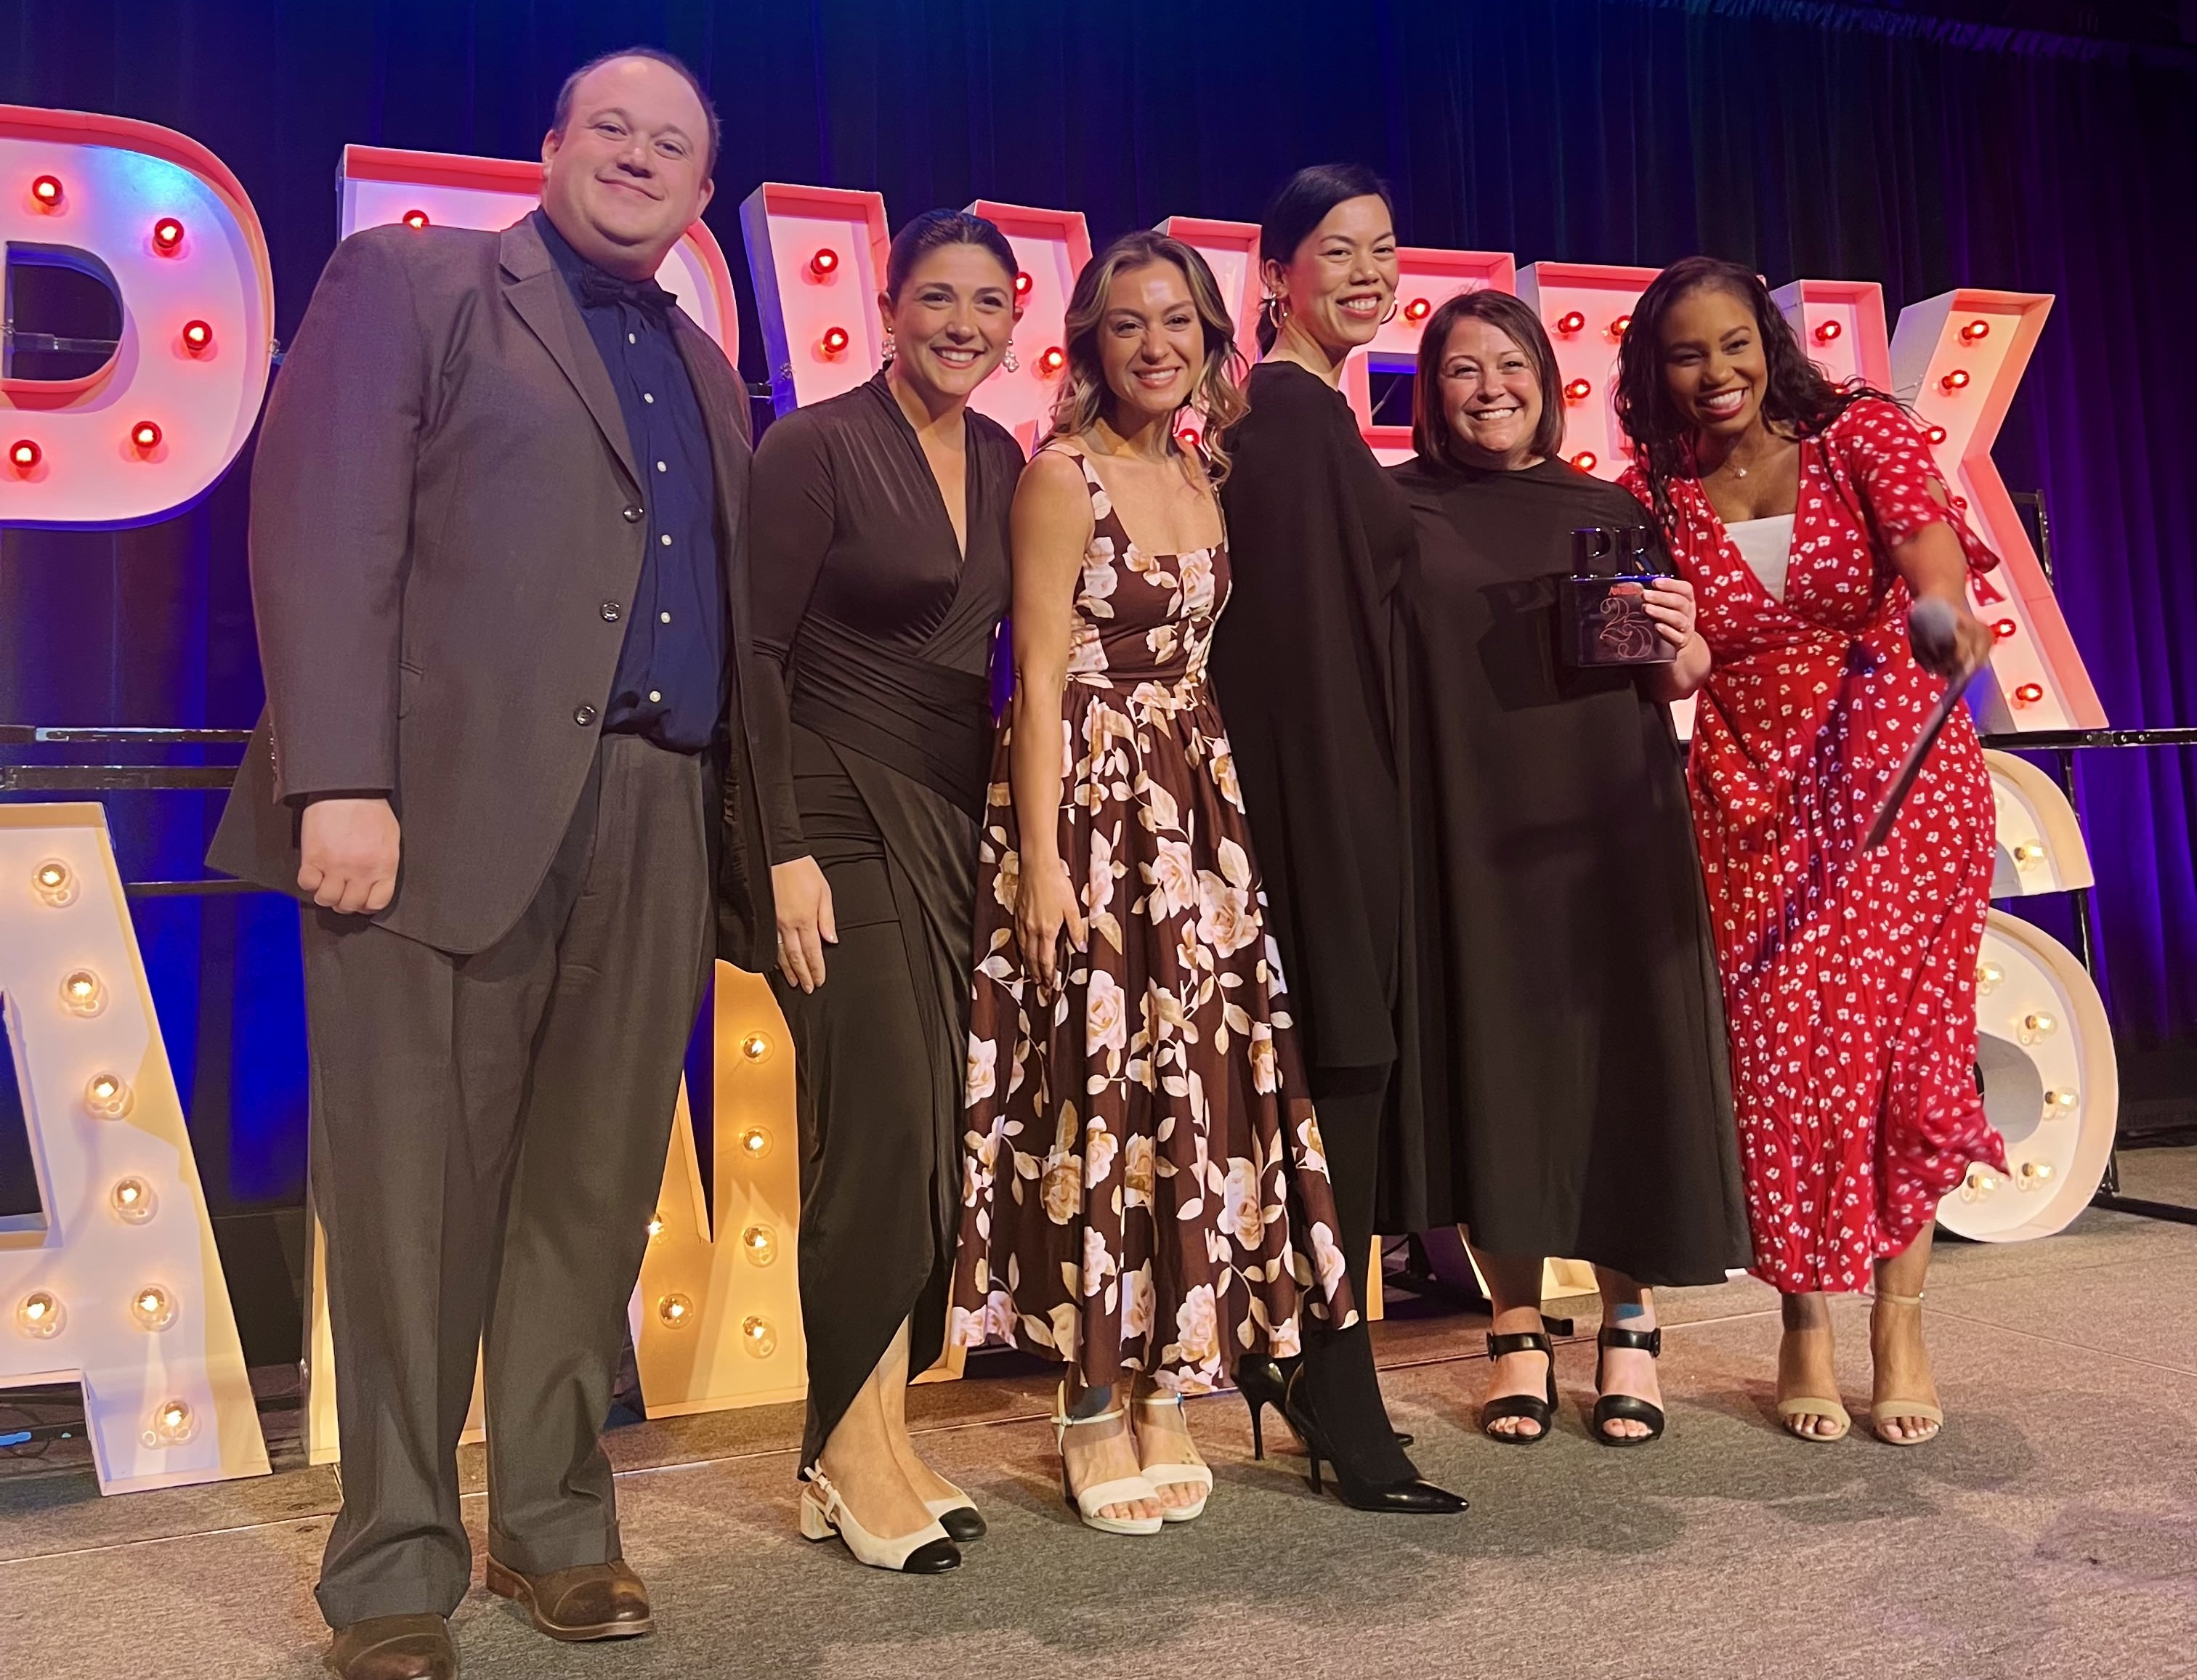 Cacique® Honored as a 2021 Best Workplace in Manufacturing